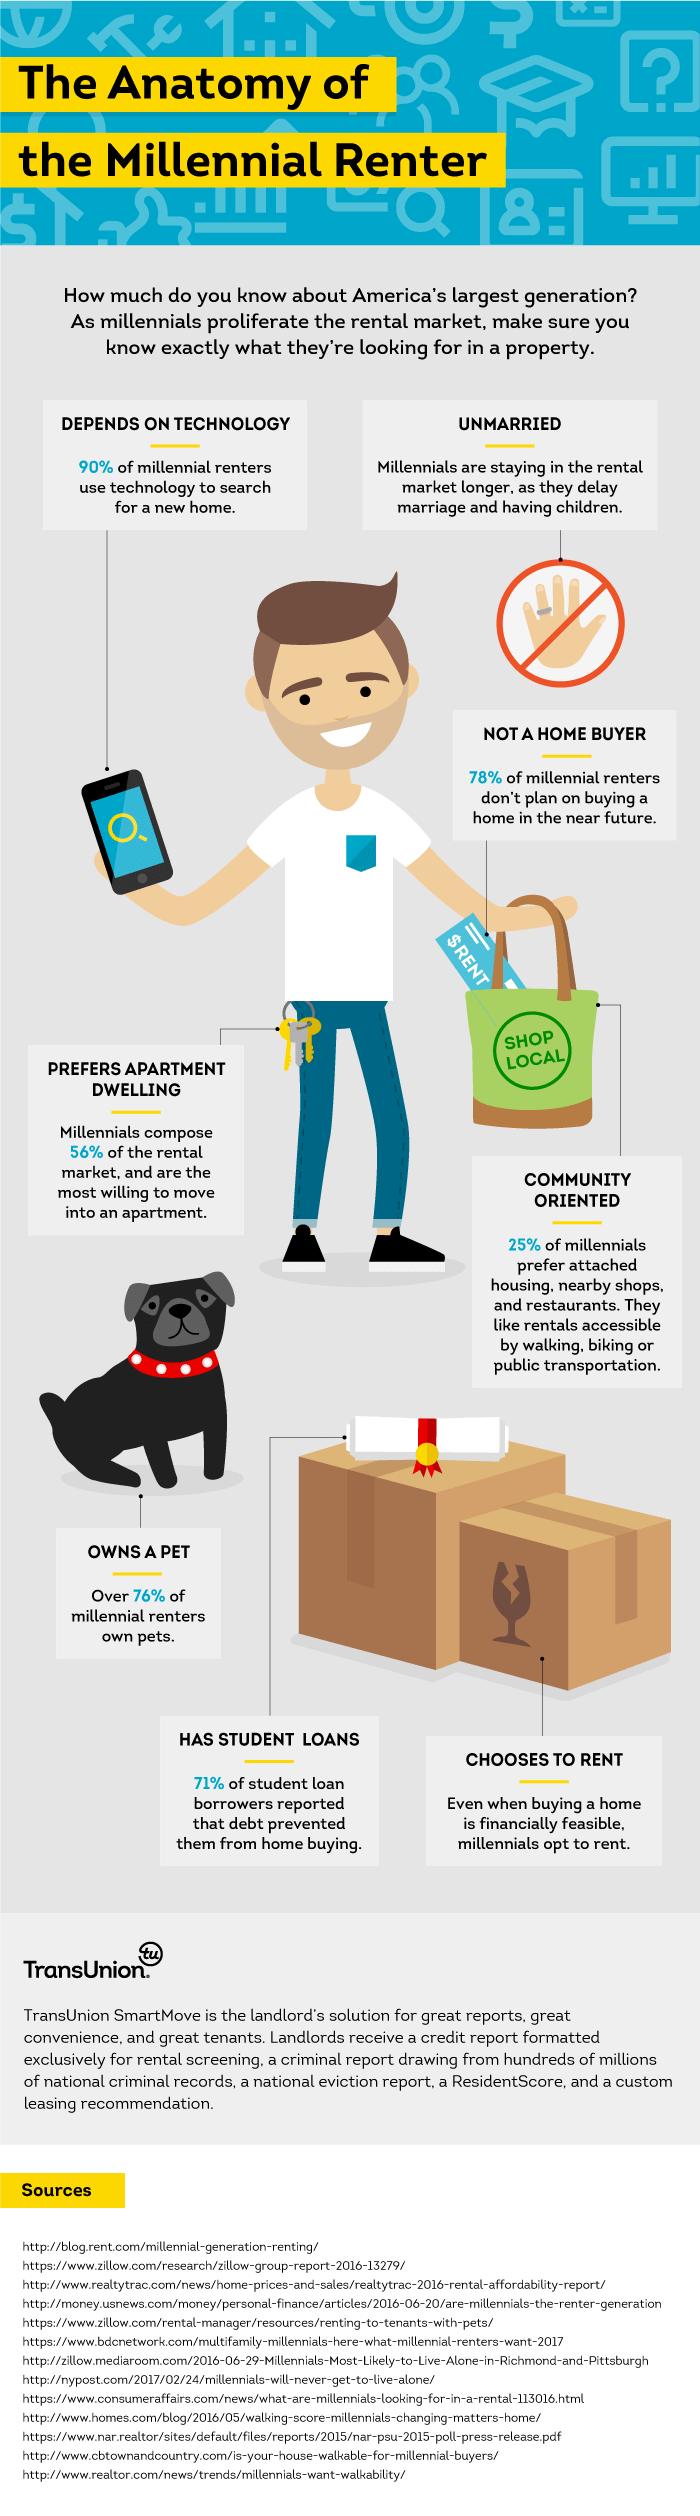 The Anatomy Of A Millennial Renter [INFOGRAPHIC]